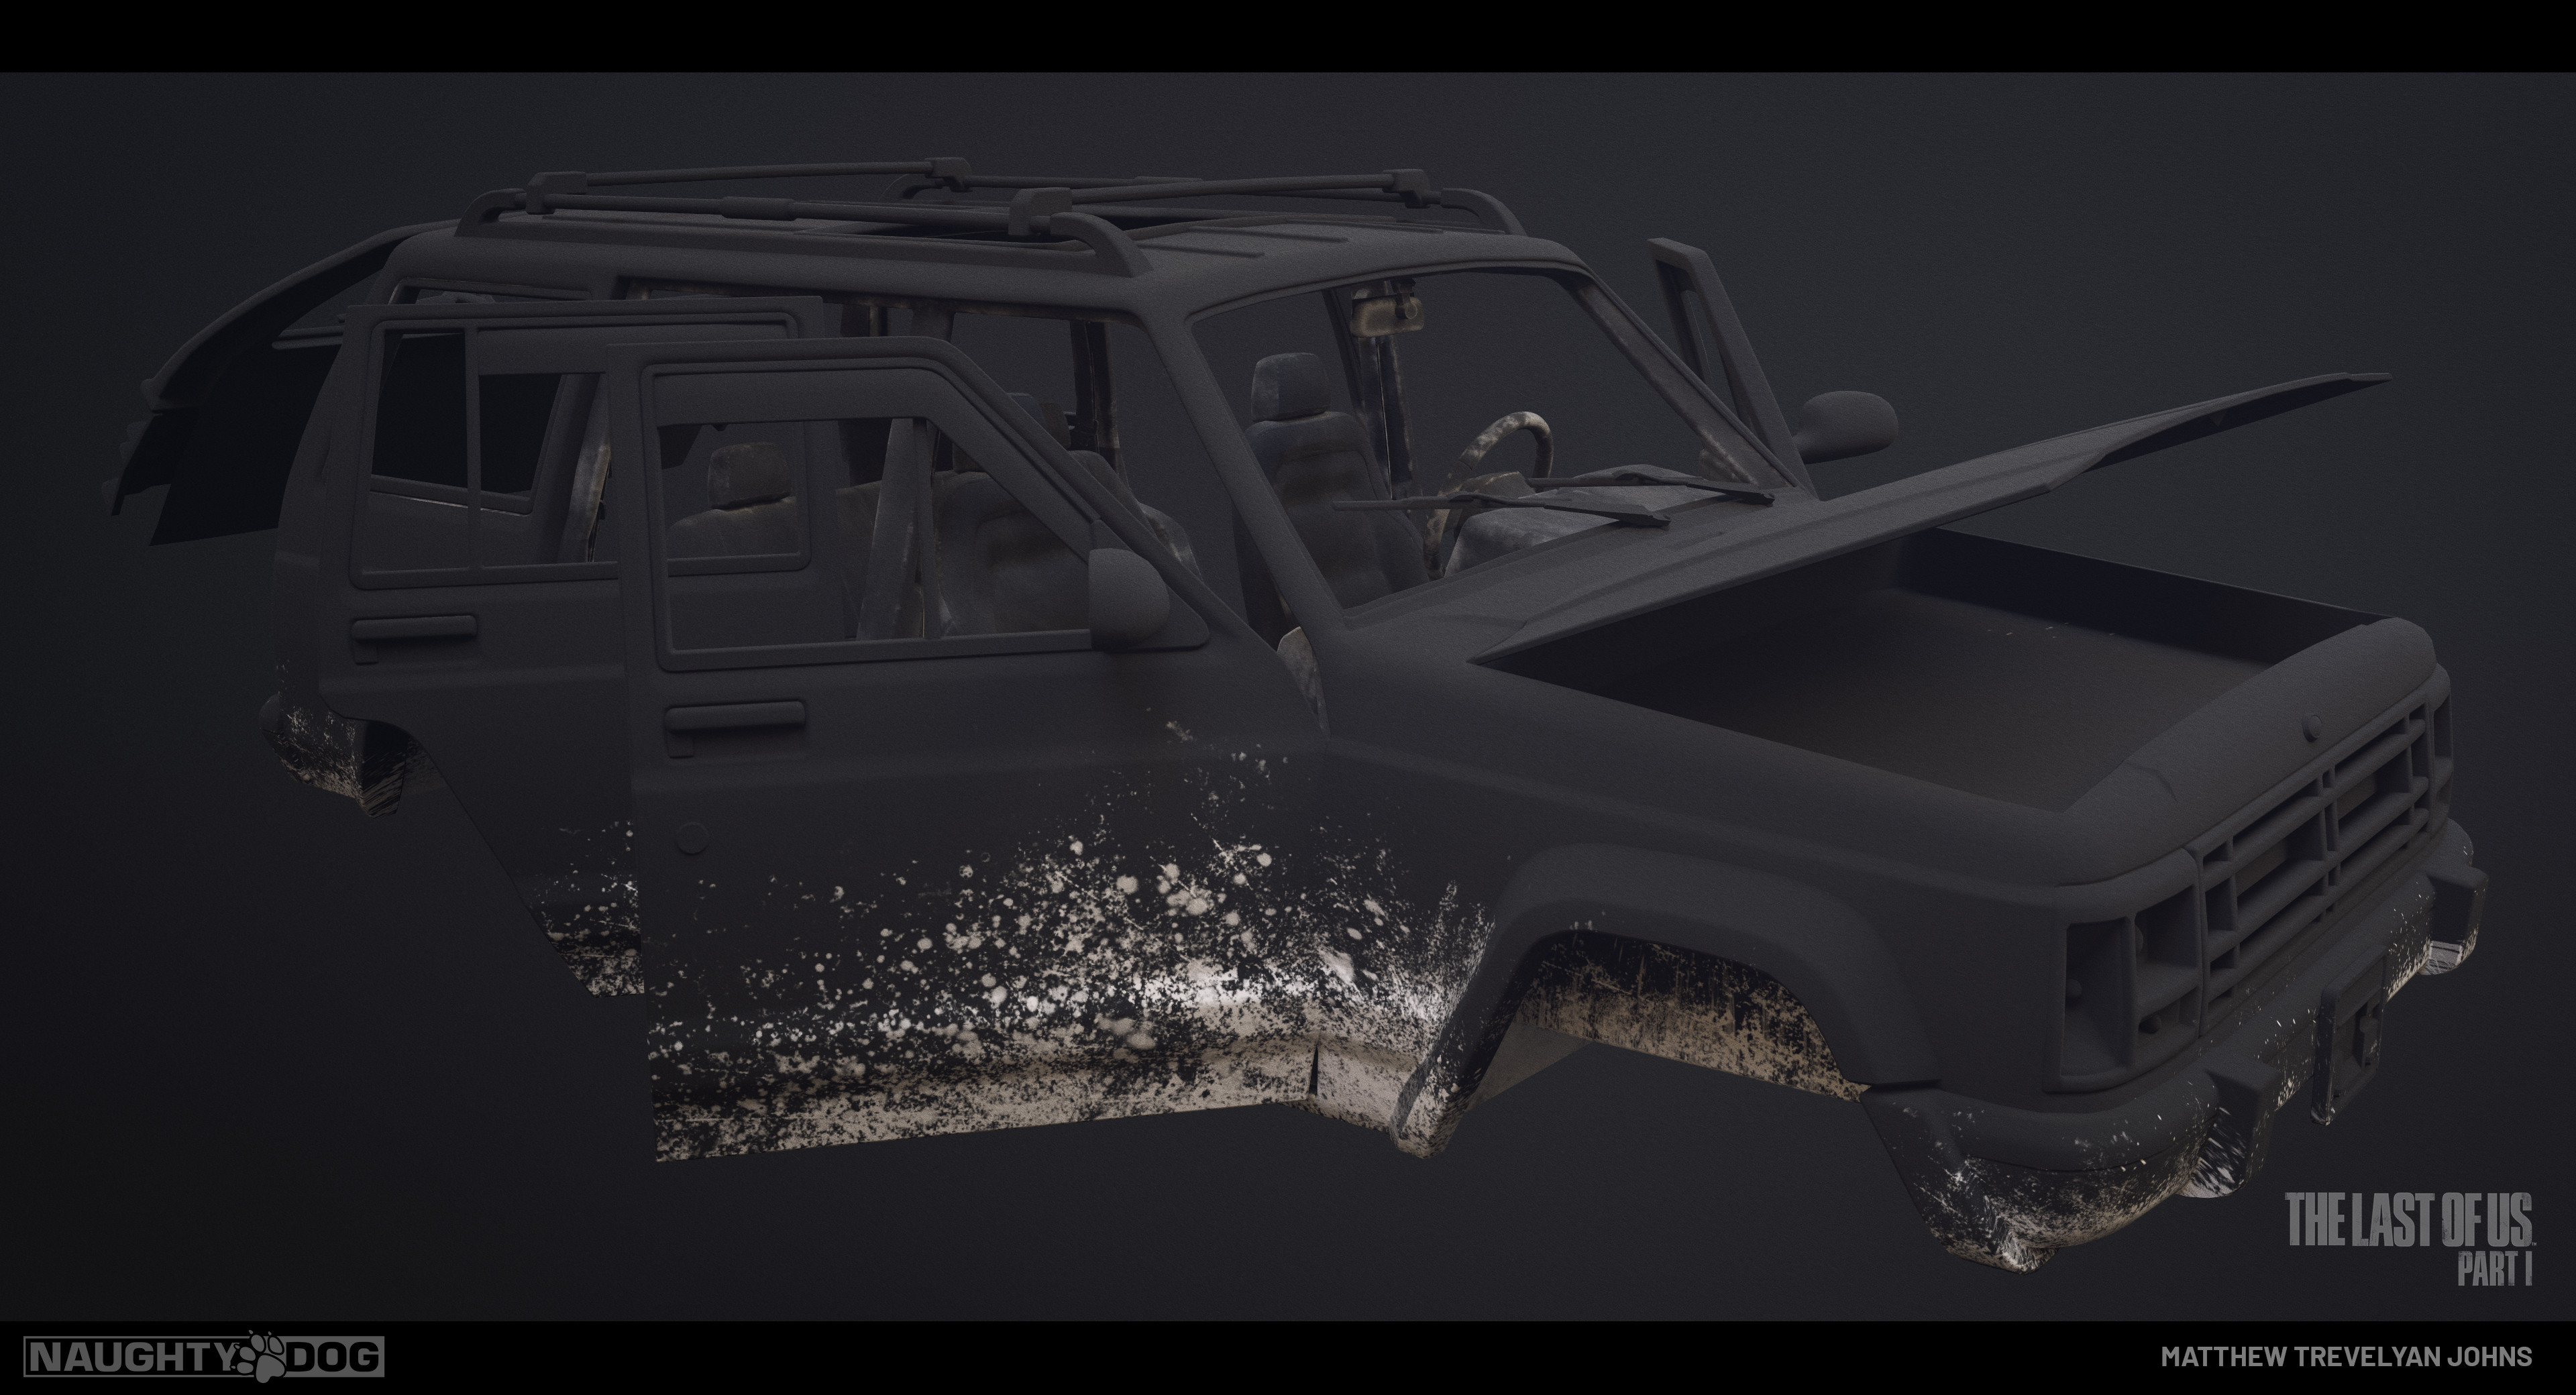 The shinier response of the clear-coat shaders could sometimes appear too reflective in areas of shadow. To counteract this, I created masks in substance painter that drove a mud layer in my shader to dampen the reflectivity around the base of the vehicle